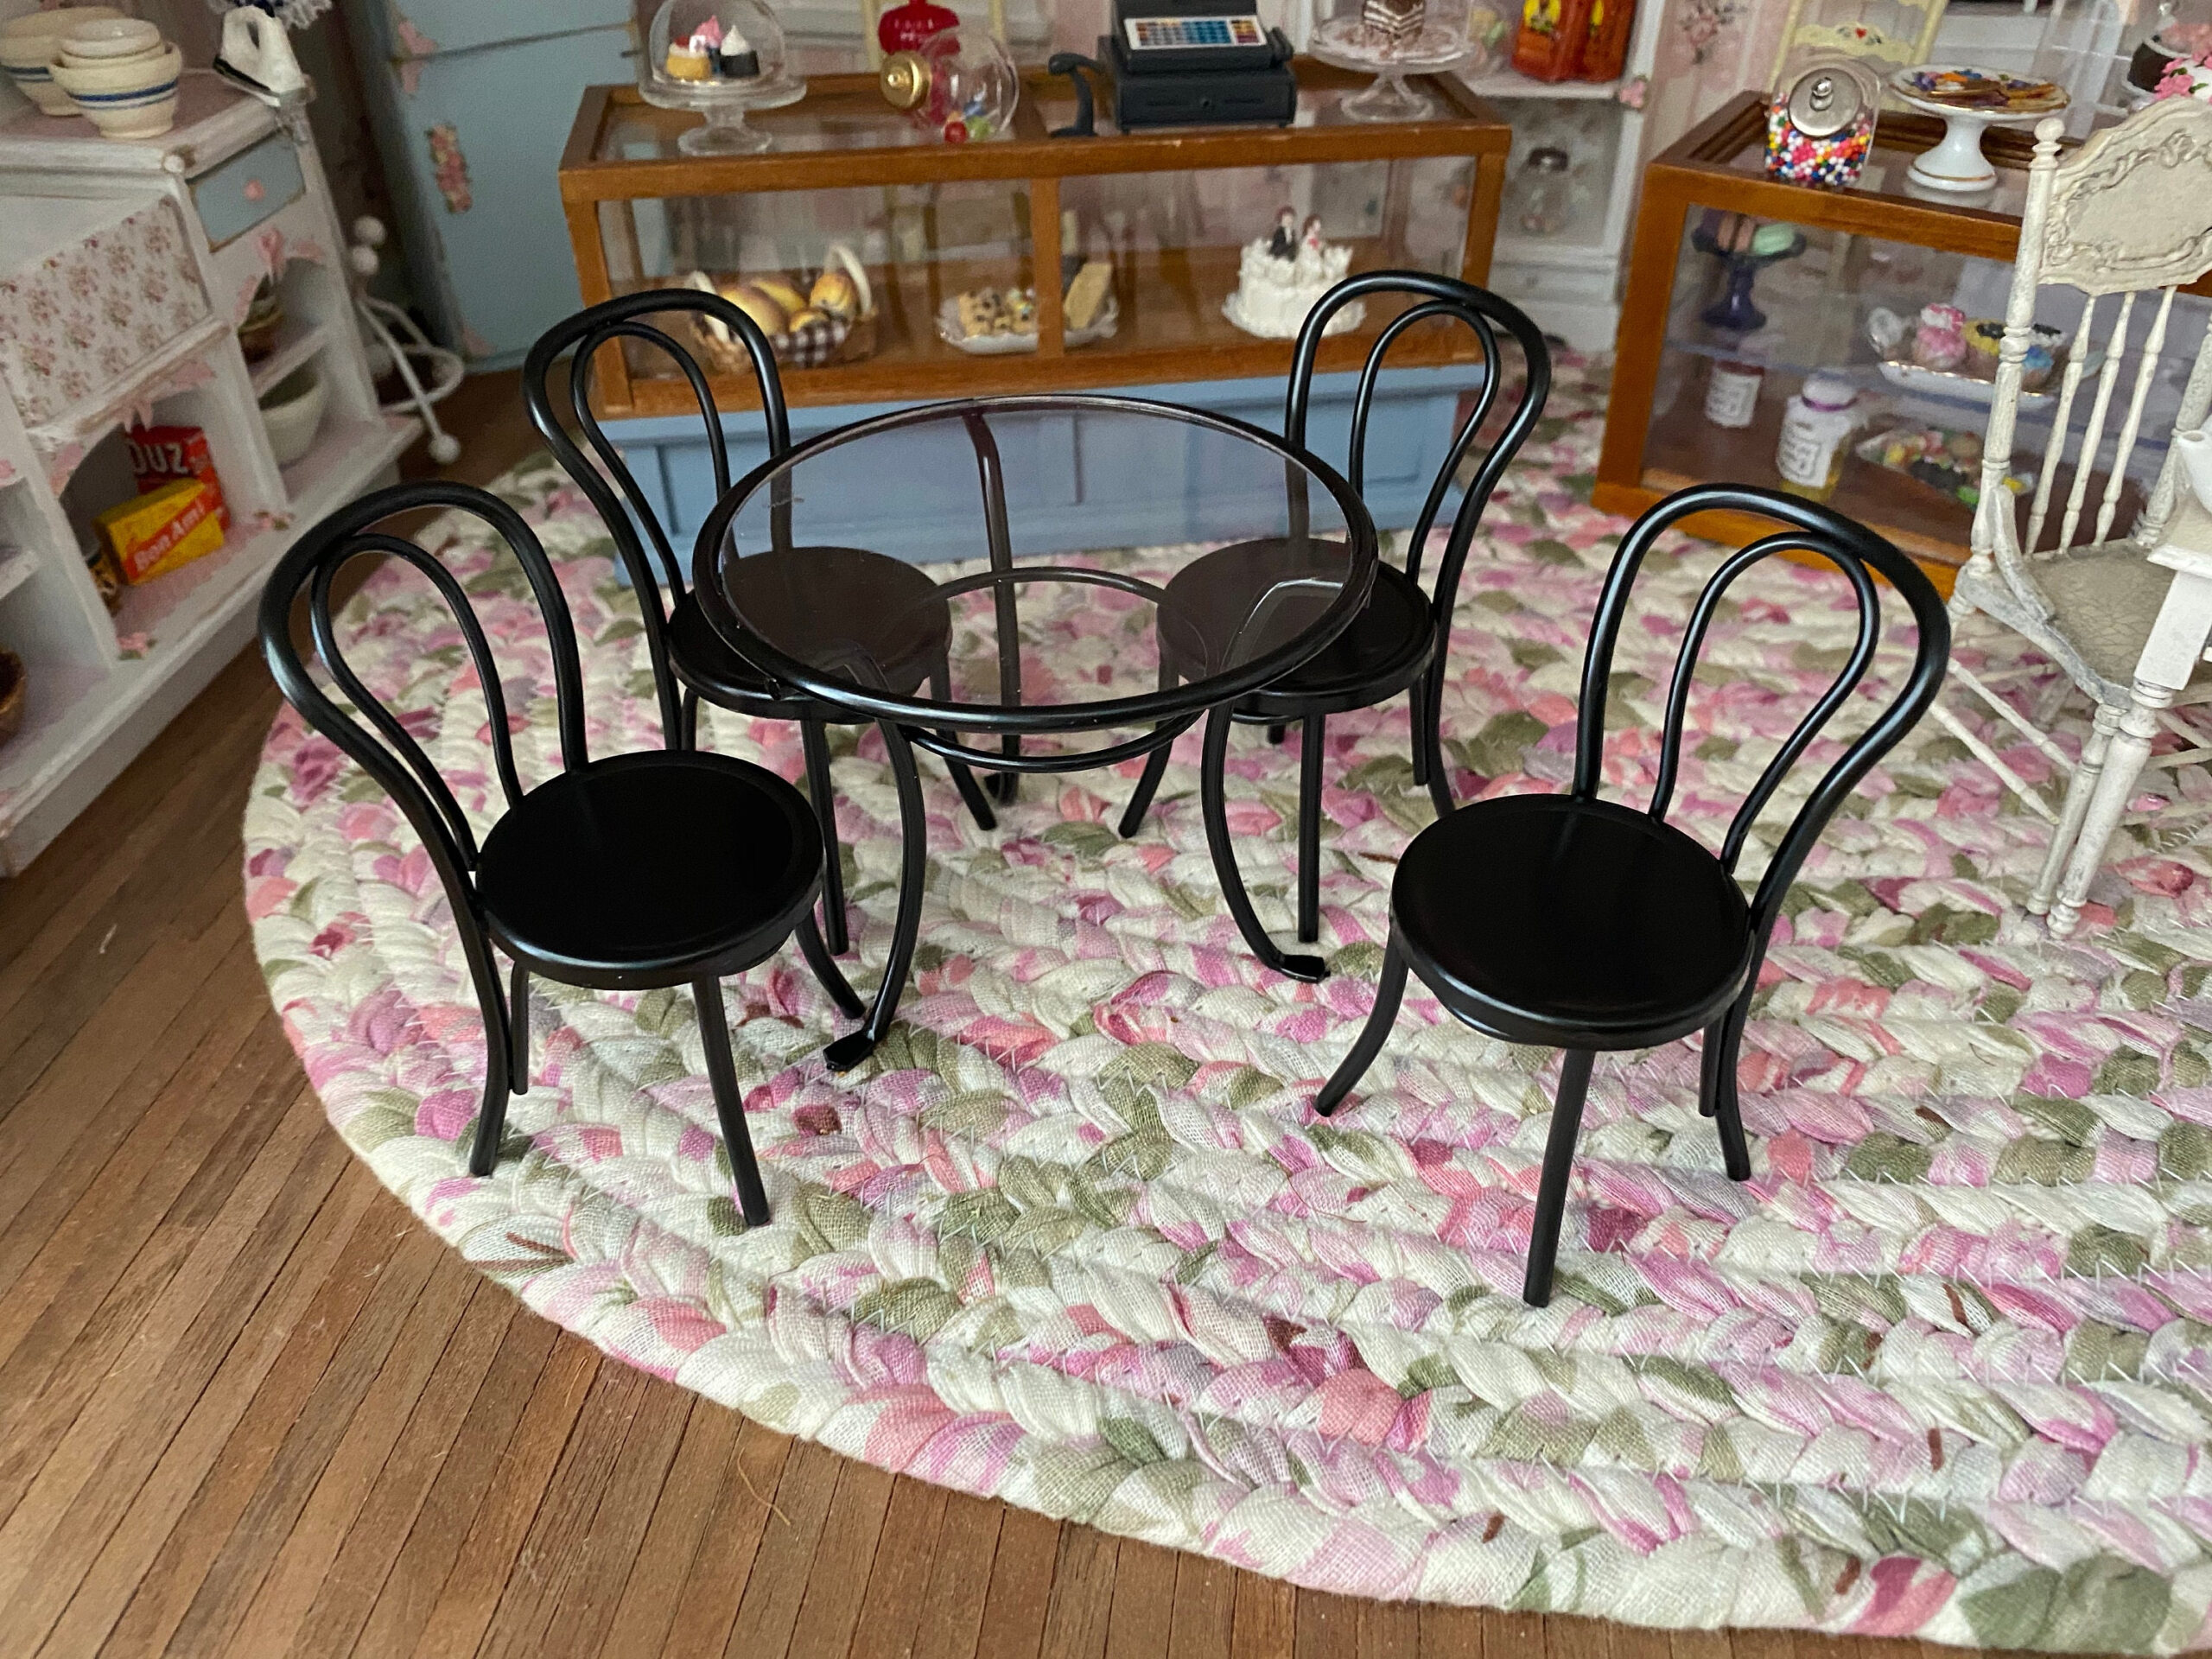 Miniature Patio Table And Chairs Black Table Clear Top 4 Chairs 